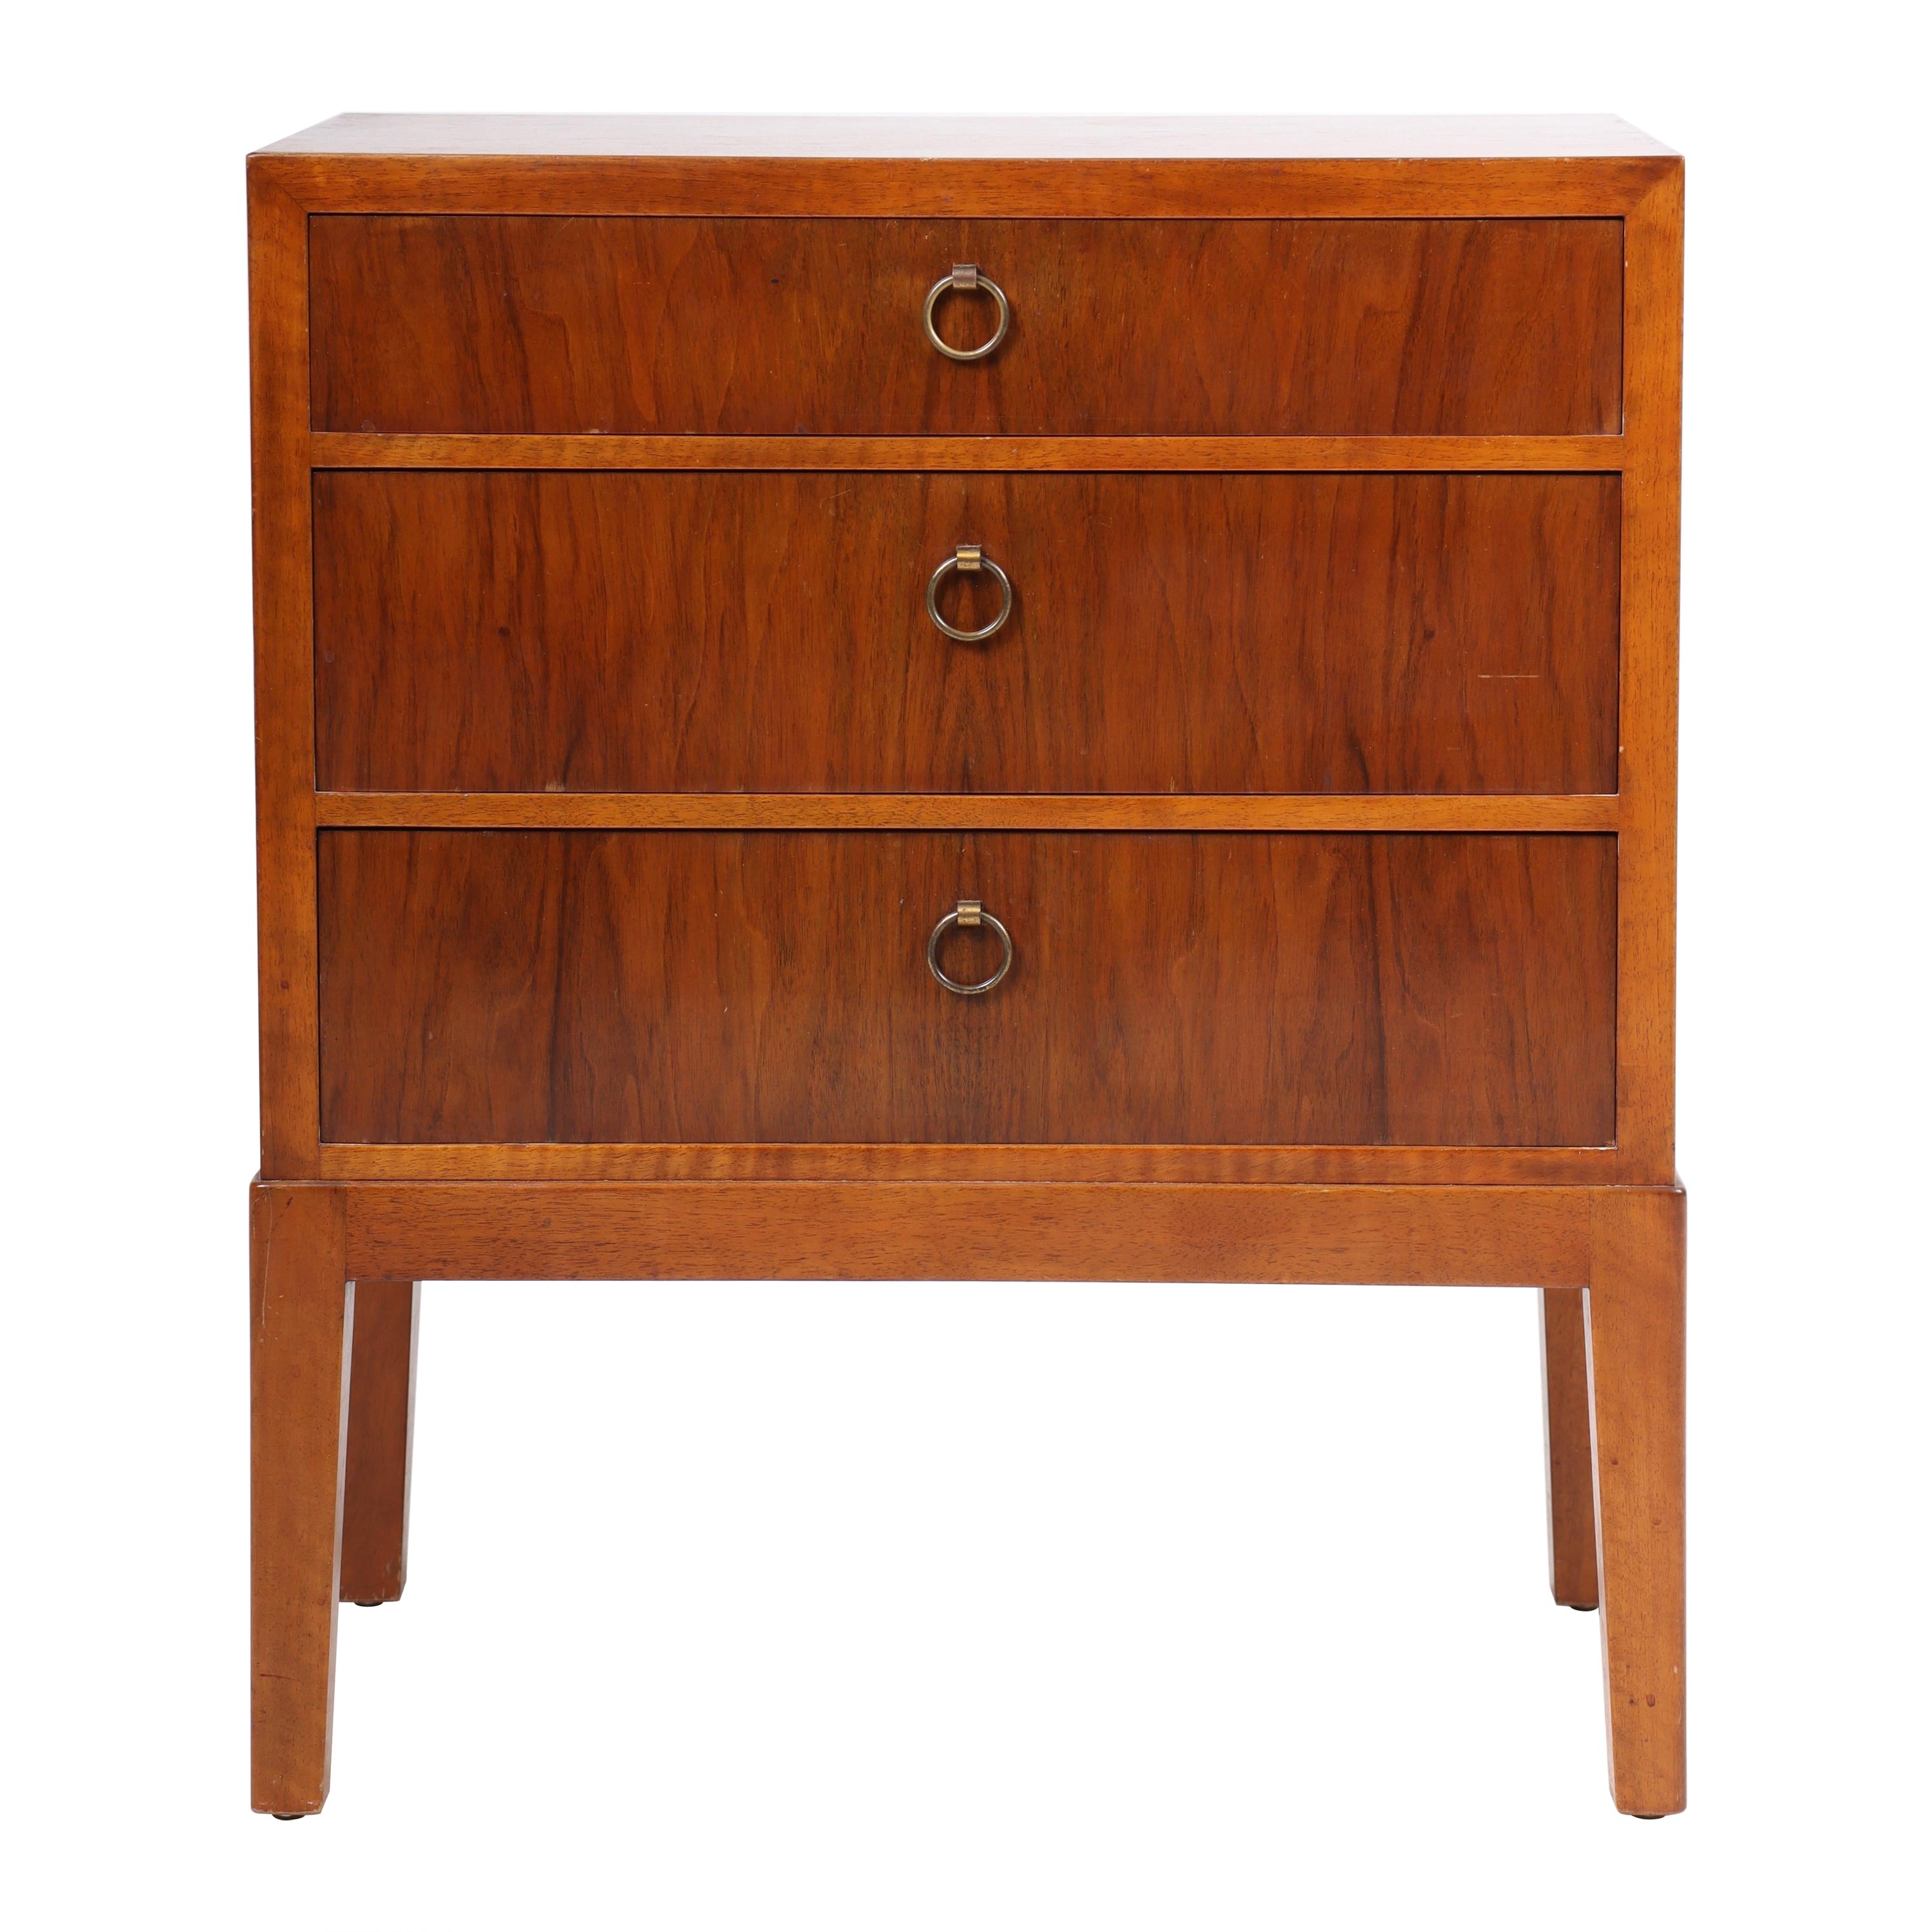 Midcentury Chest of Drawers by Thorald Madsen, Danish Design, 1950s For Sale